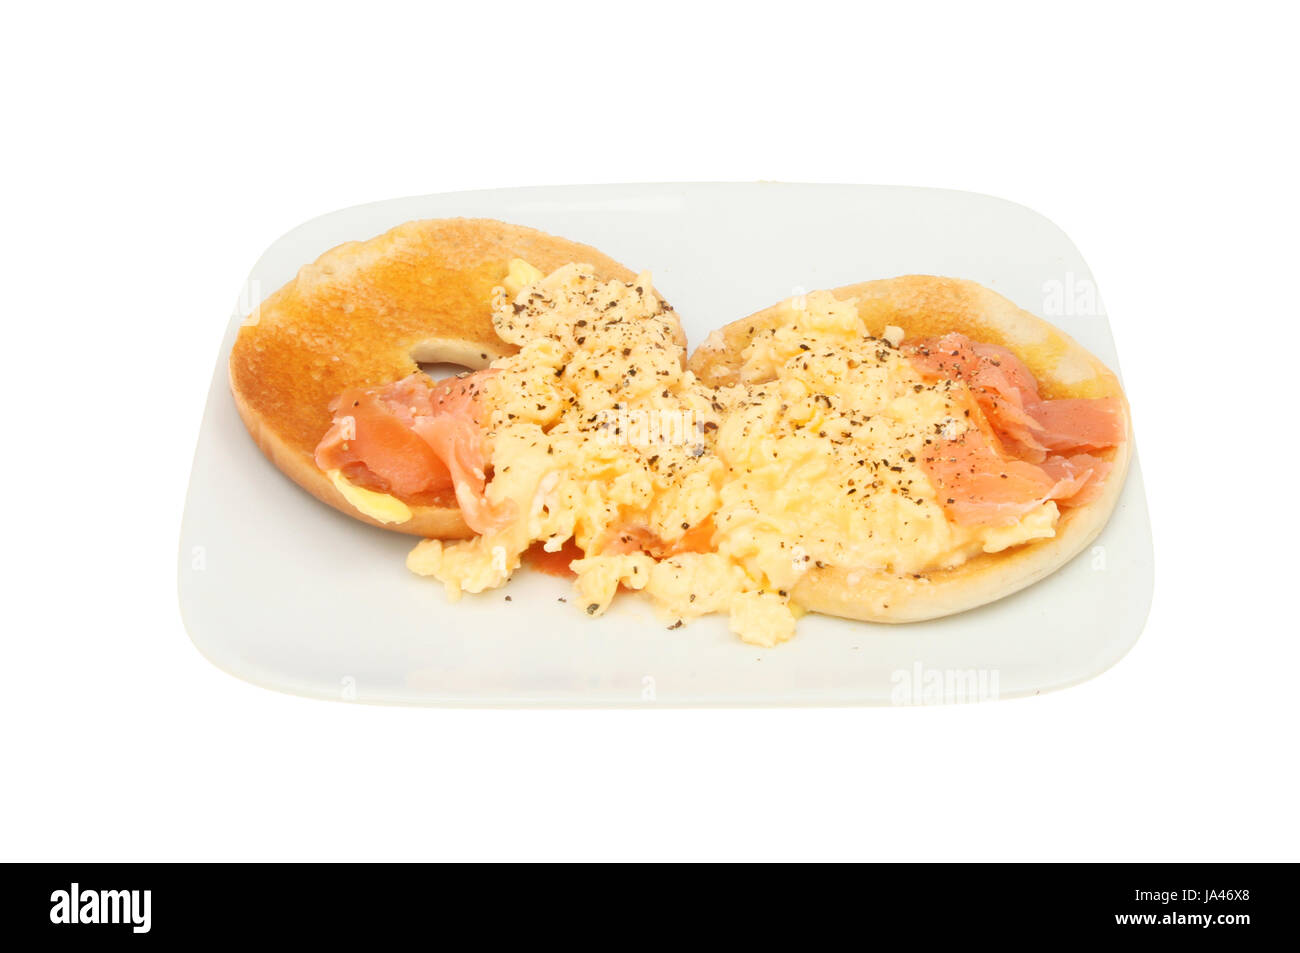 Smoked salmon and scrambled egg on a toasted bagel isolated against white Stock Photo